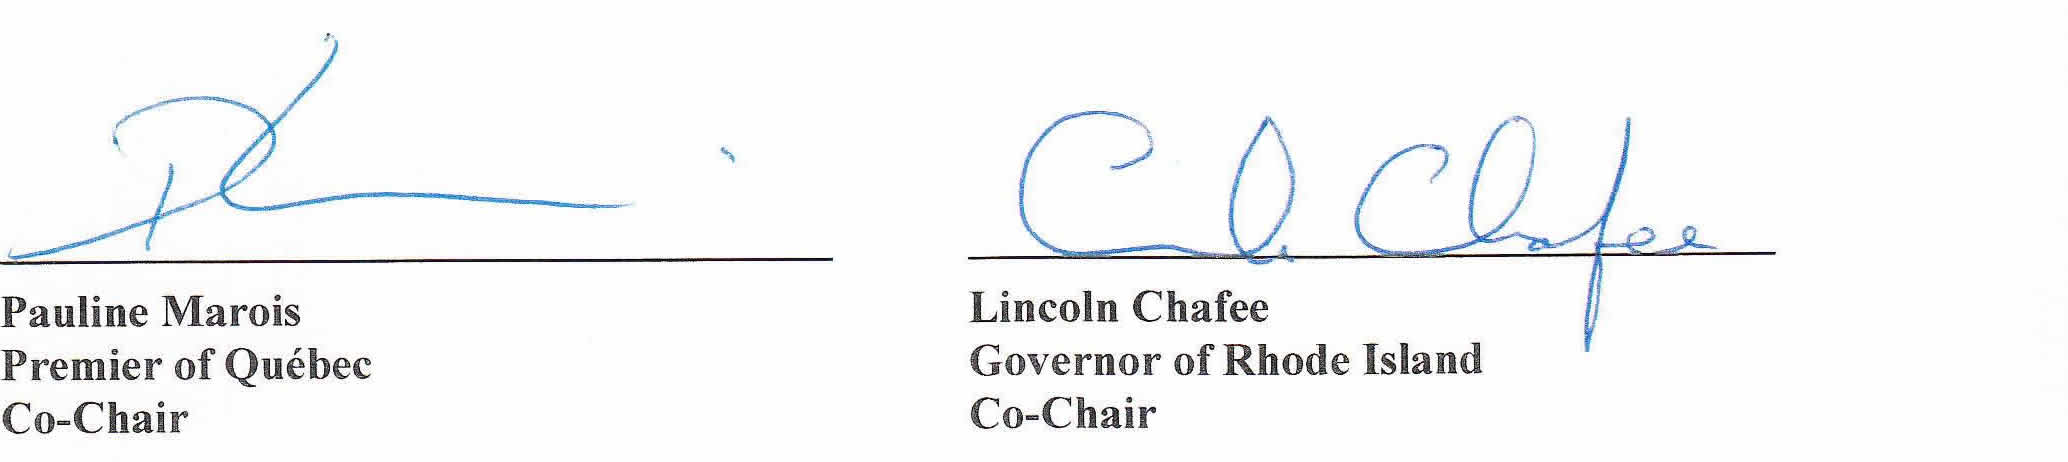 Signature of Pauline Marois, Premier of Québec, Co-Chair and Lincoln Chafee, Governor of Rhode Island, Co-Chair